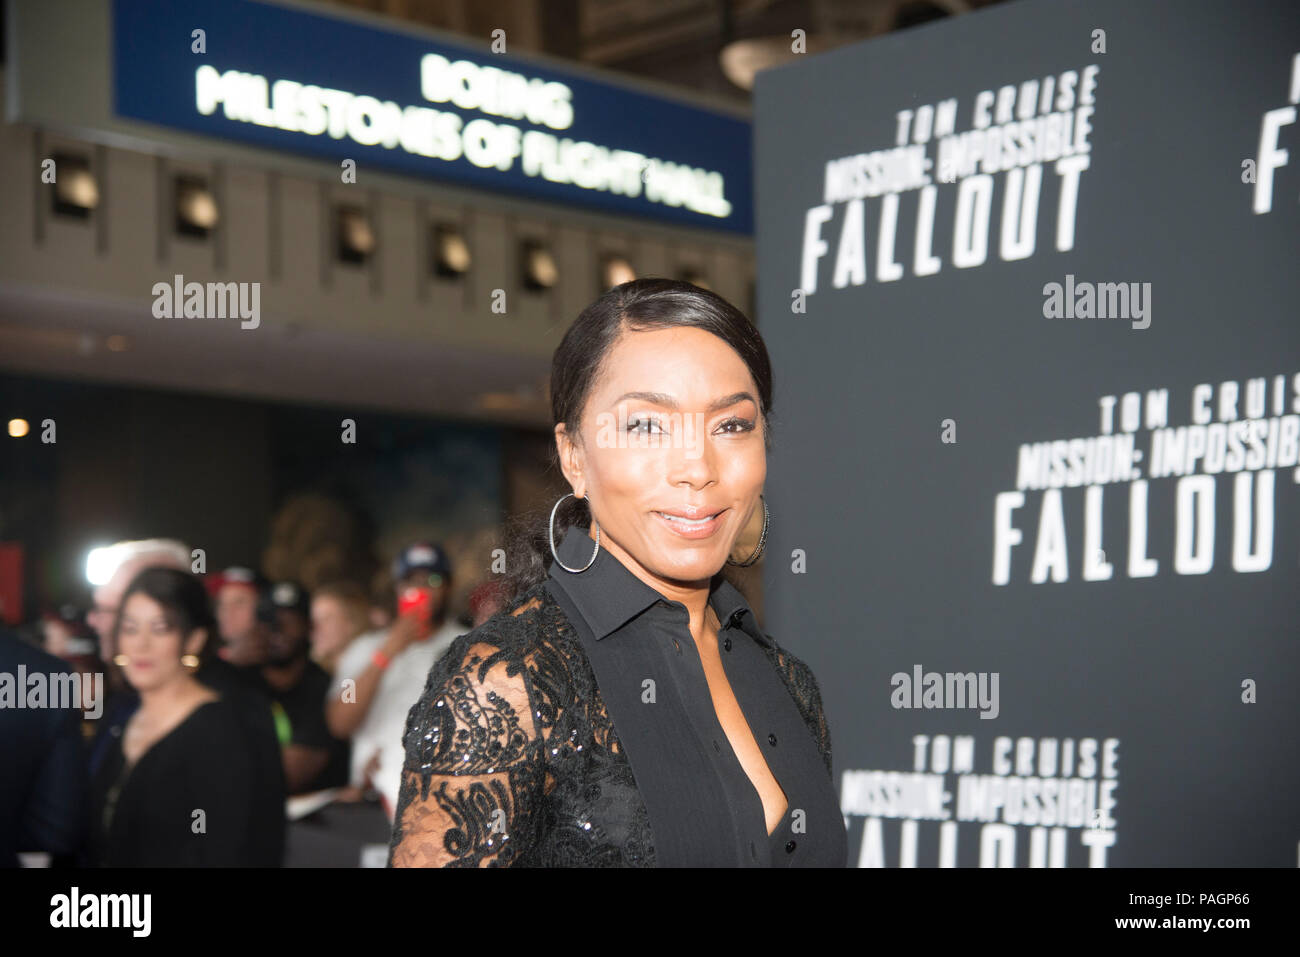 Washington DC, July 22 2018, USA: The new Tom Cruise movie, Mission Impossible: Fallout, has its premiere at the Smithsonian Air and Space Museum in Washington DC. Some of the stars attending include Angela Bassett.  Patsy Lynch/Alamy Stock Photo